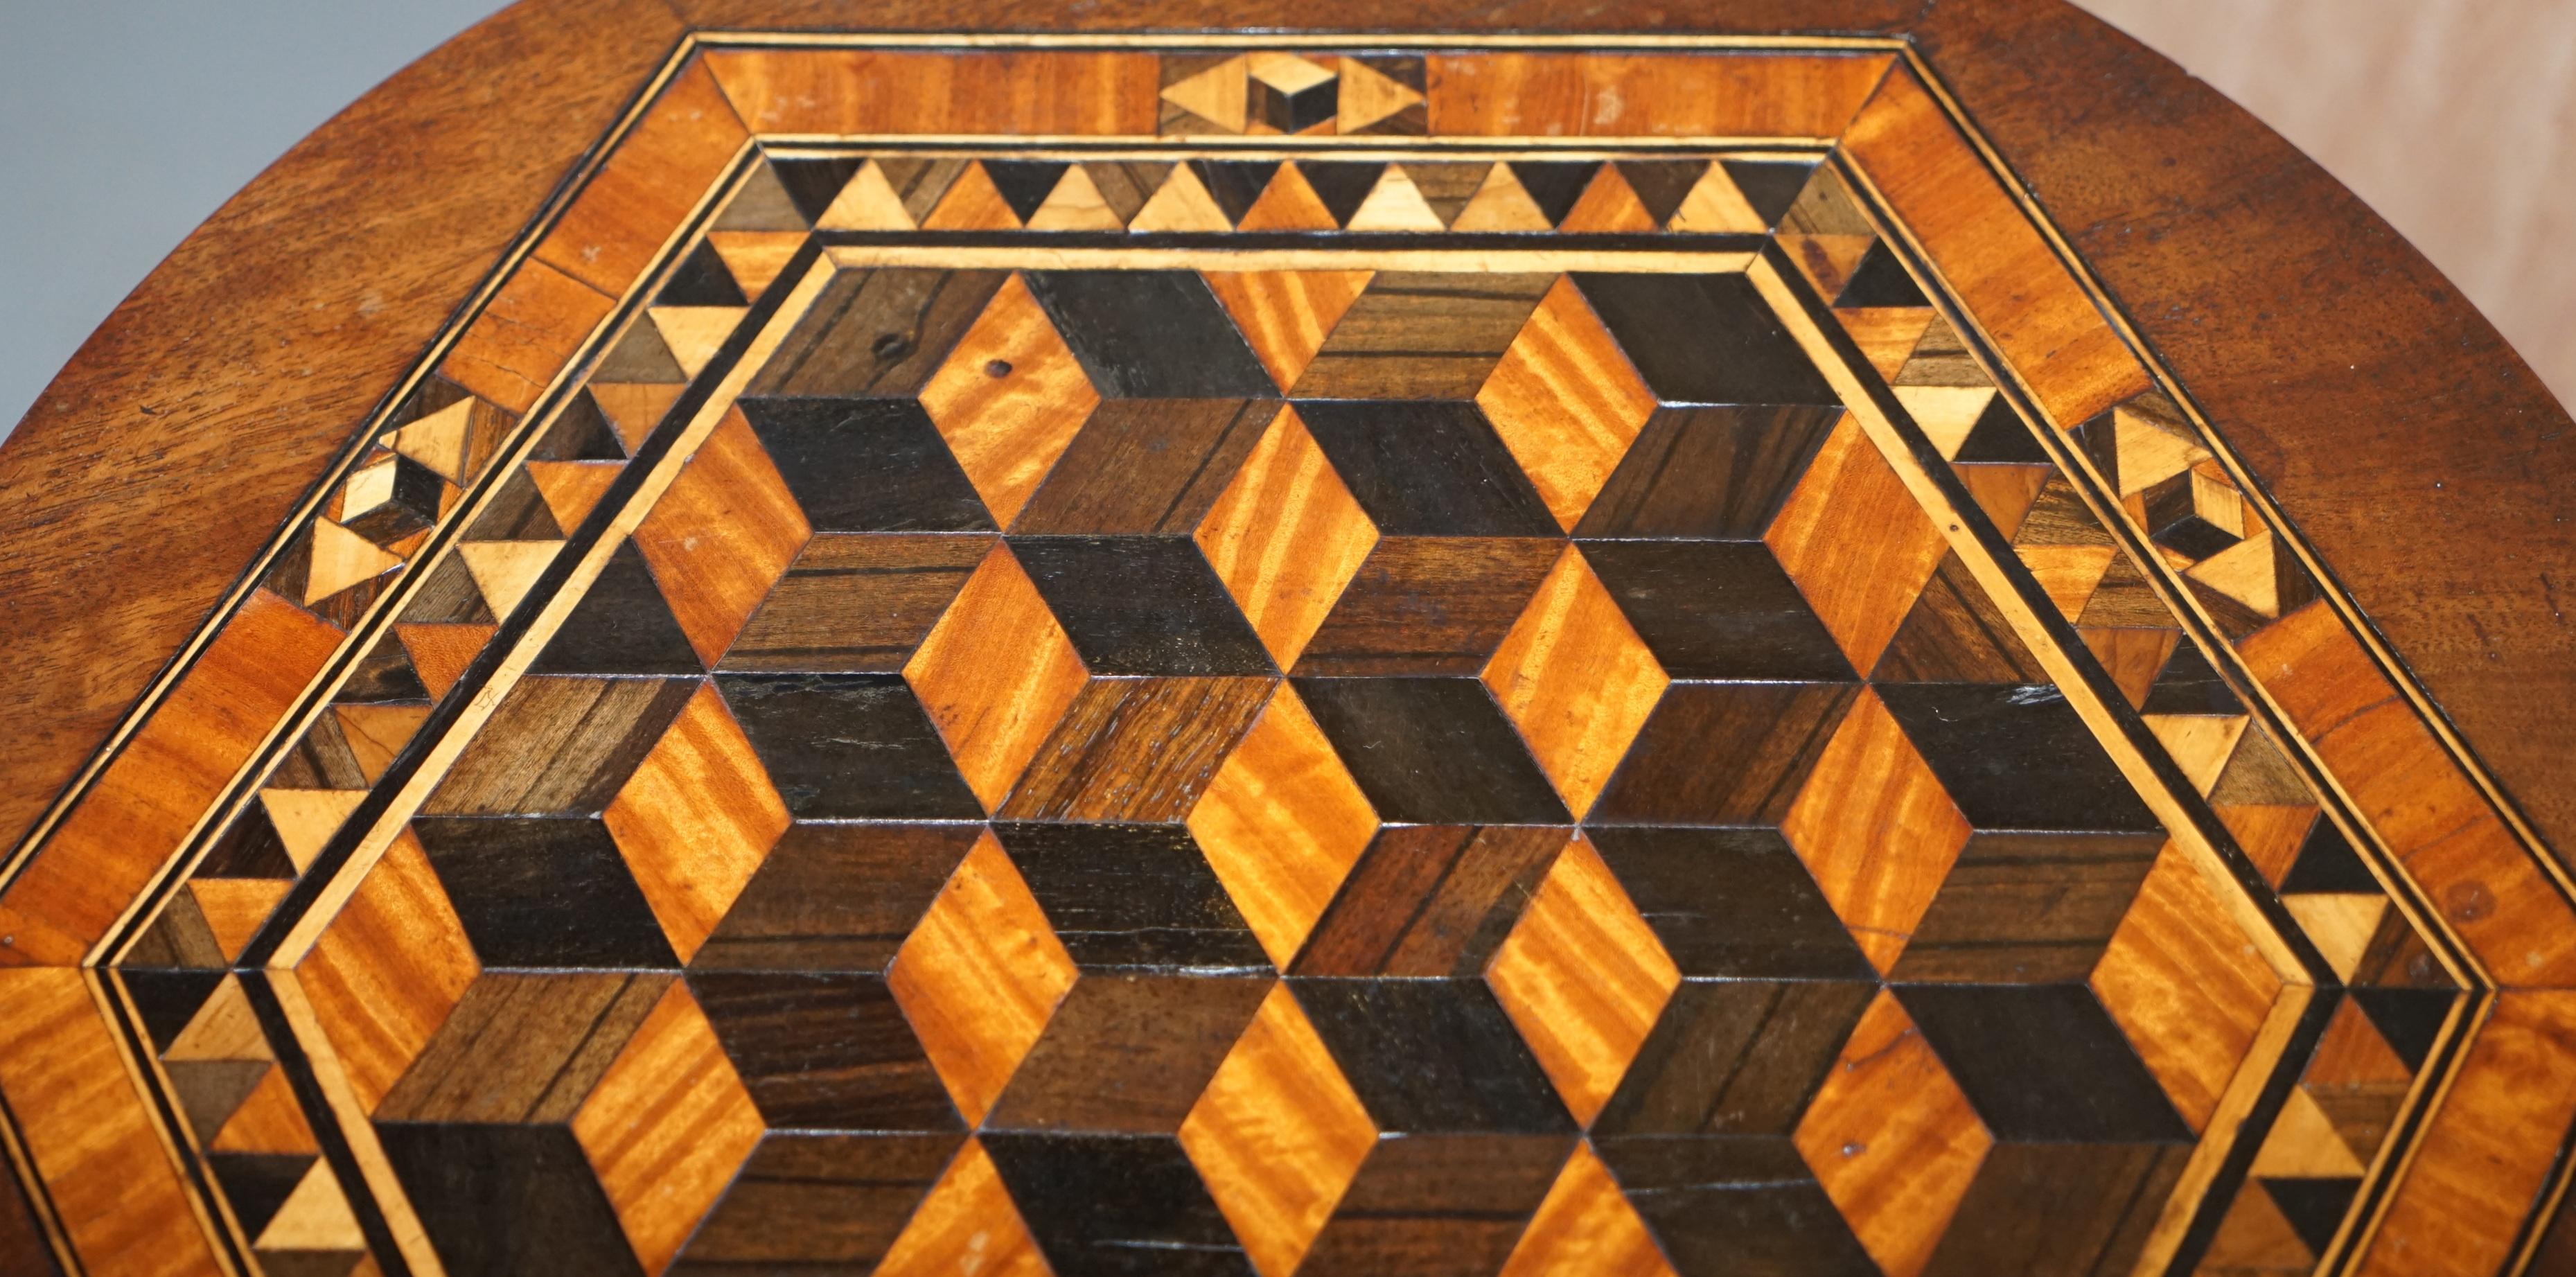 19th Century Rare Victorian Hardwood Occasional Table, Geometric Parquetry Inlaid Wood Top For Sale